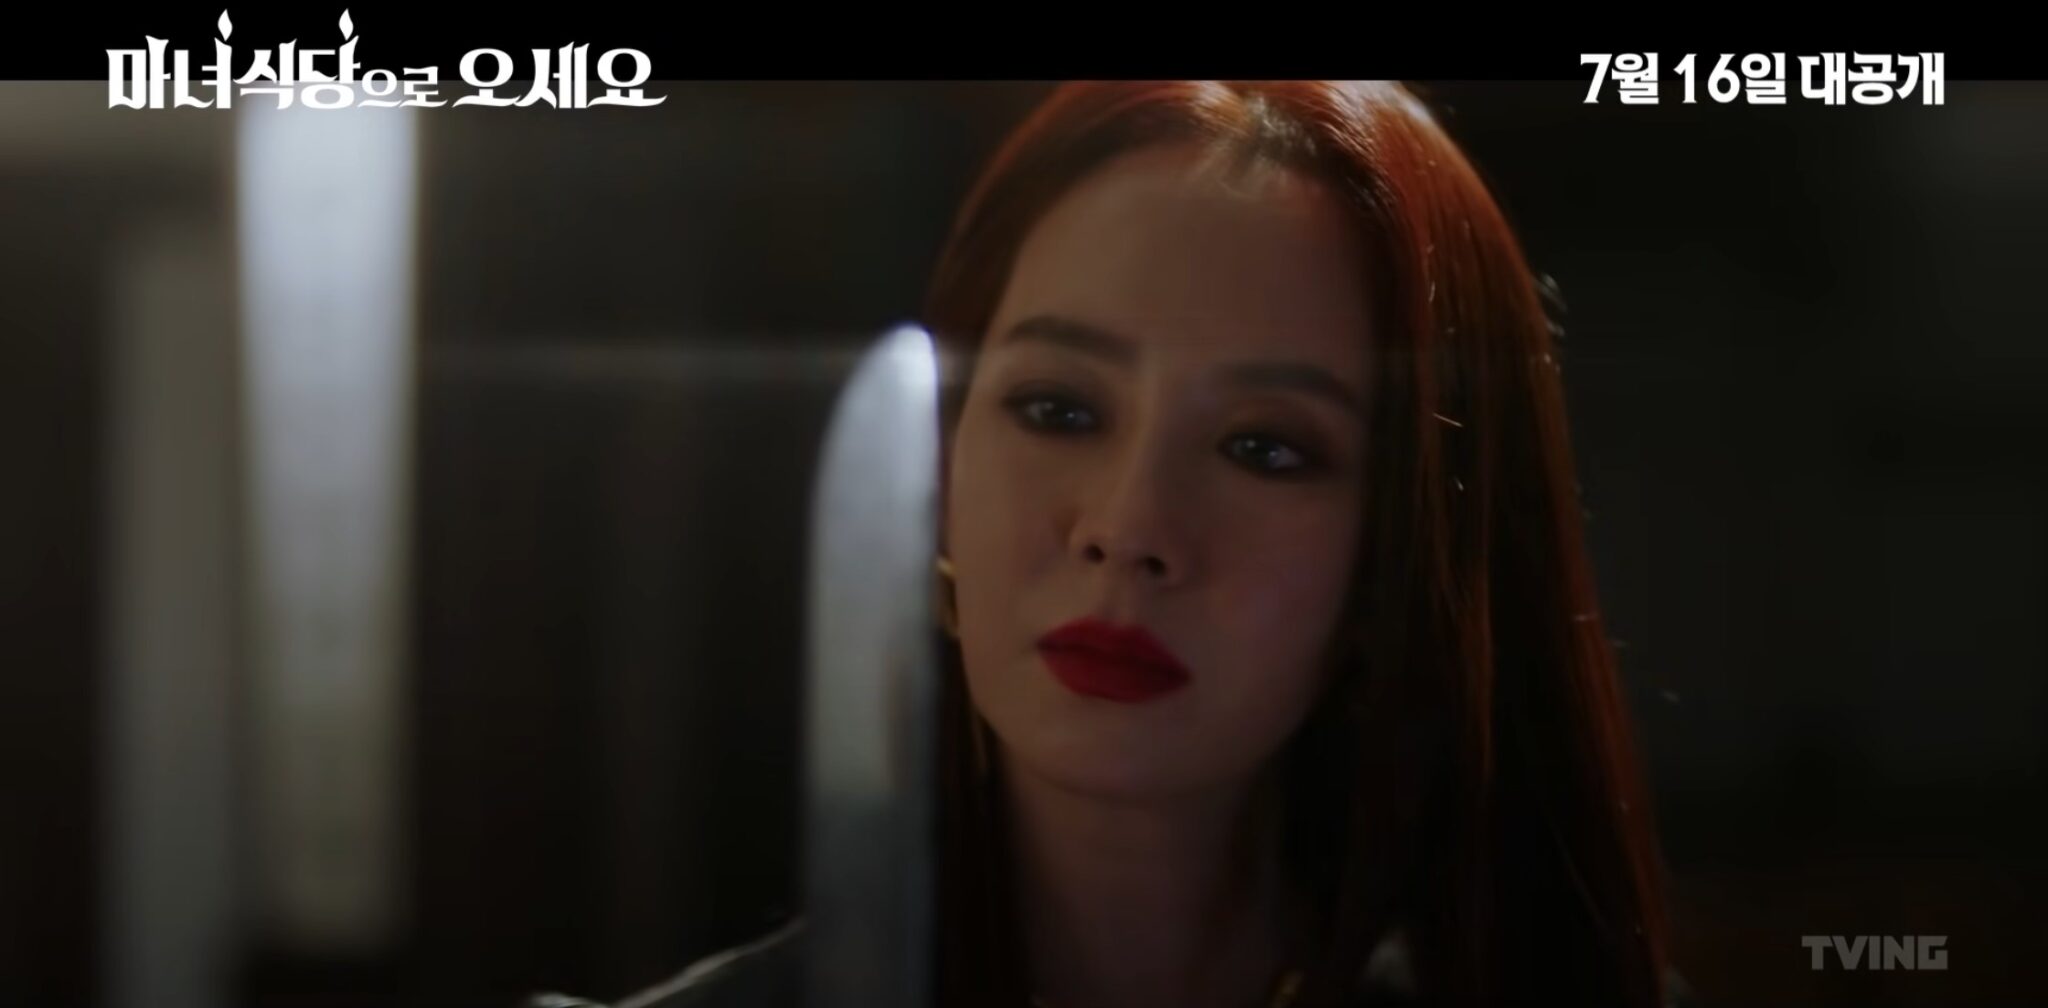 Song Ji-hyo serves wishes in The Witch’s Diner, with Nam Ji-hyun, Chae Jong-hyeop